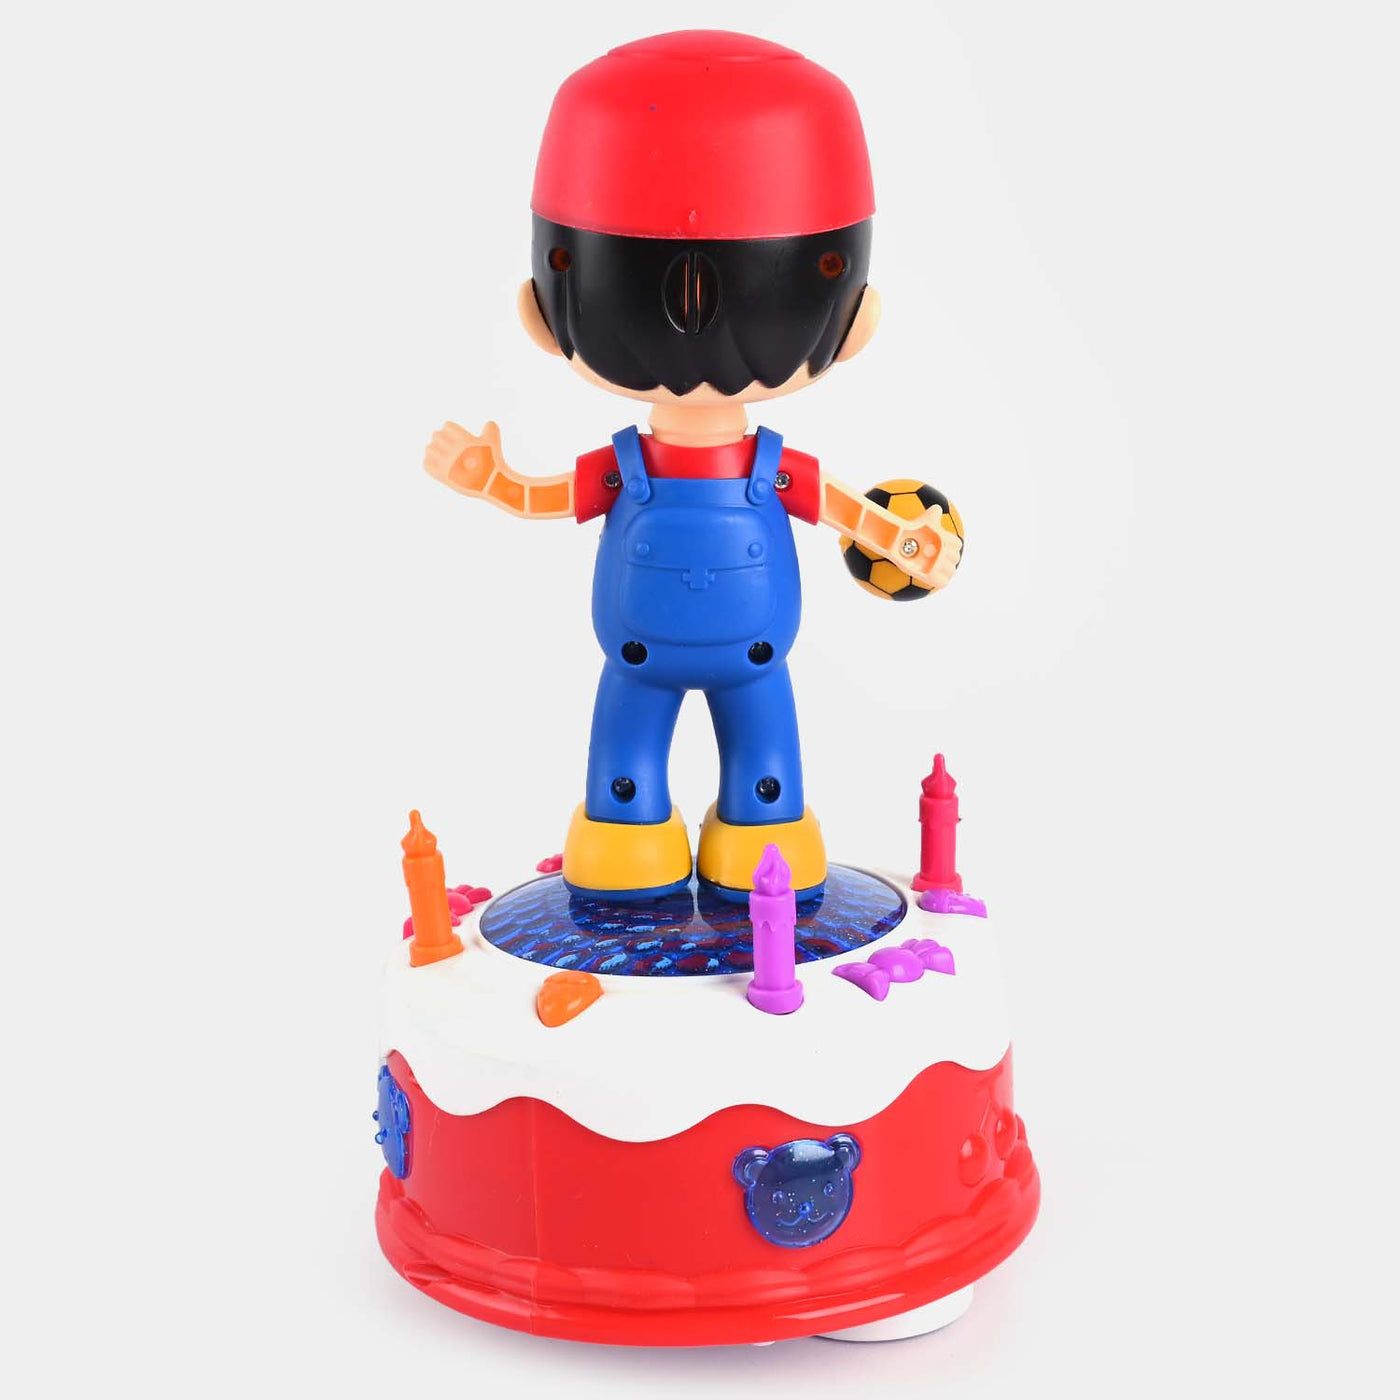 Universal Cake Station Boy With Light & Music Toy